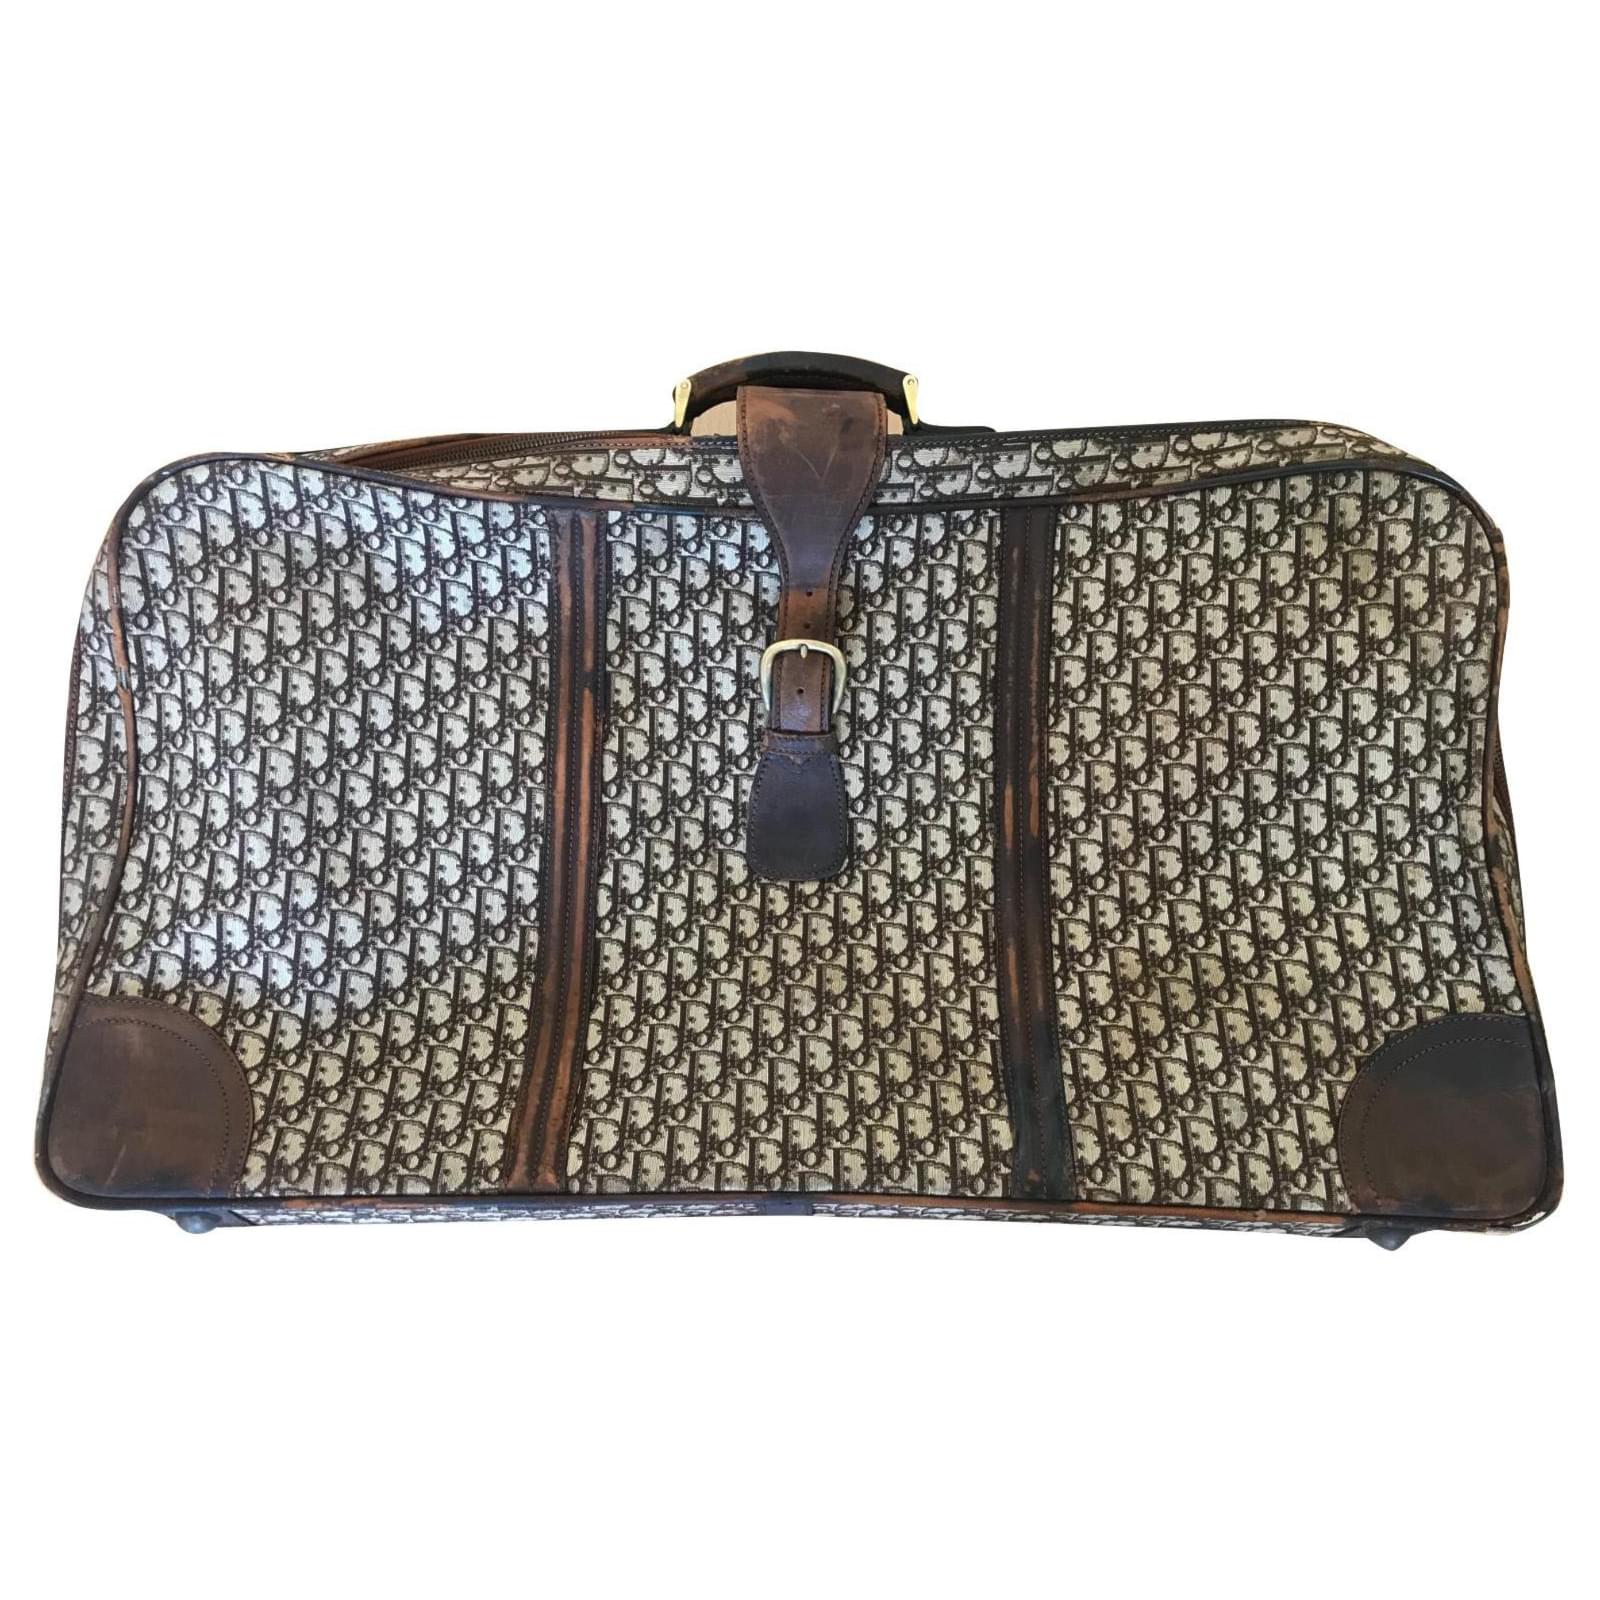 Christian Dior | Diorissimo Suitcase Luggage Vintage Brown Beige Travel Bag